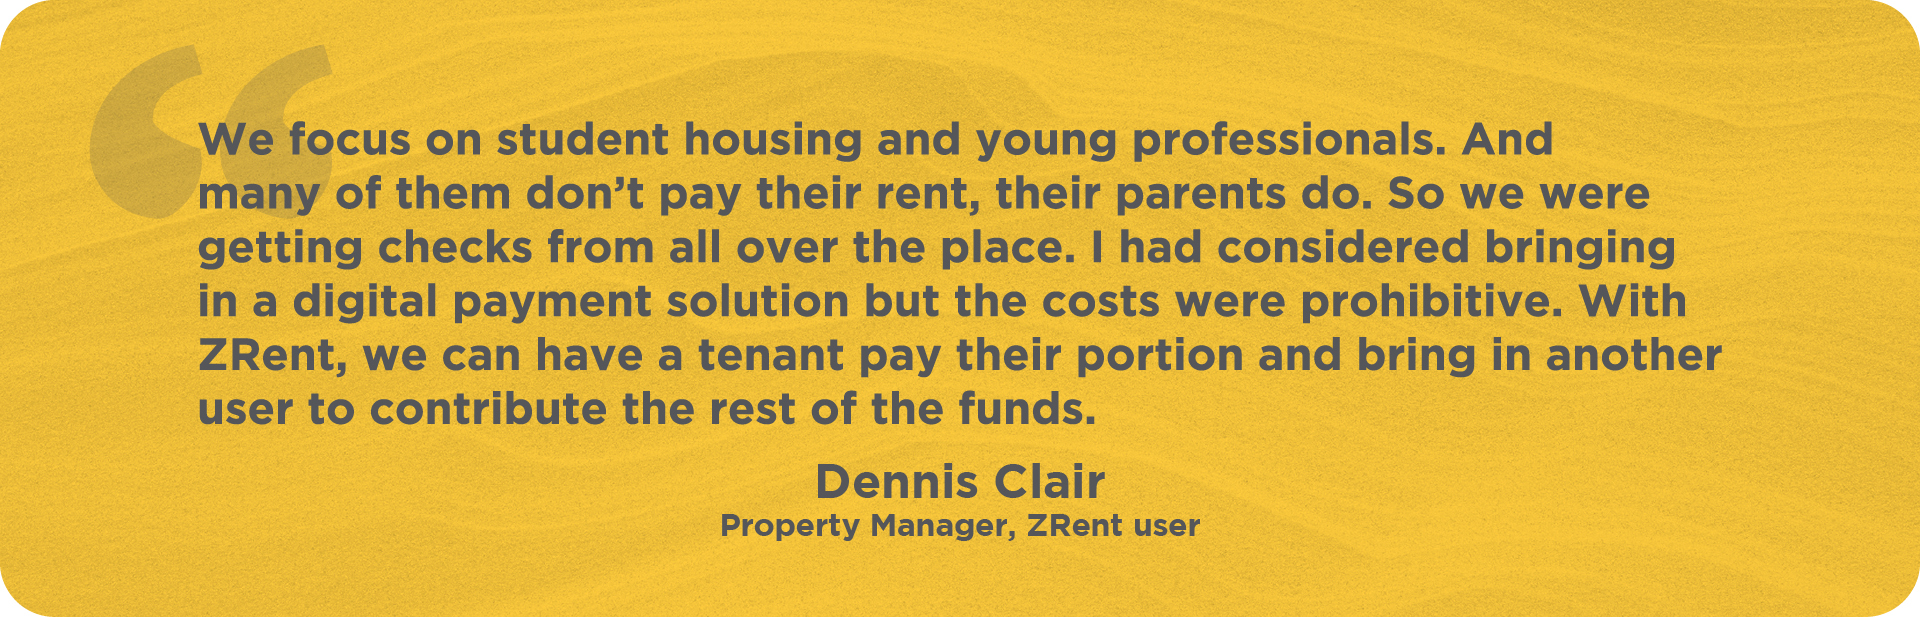 Quote from property manager about ZRent being used as a digital payment solution since student housing and young professionals don't pay their, but their parents do.